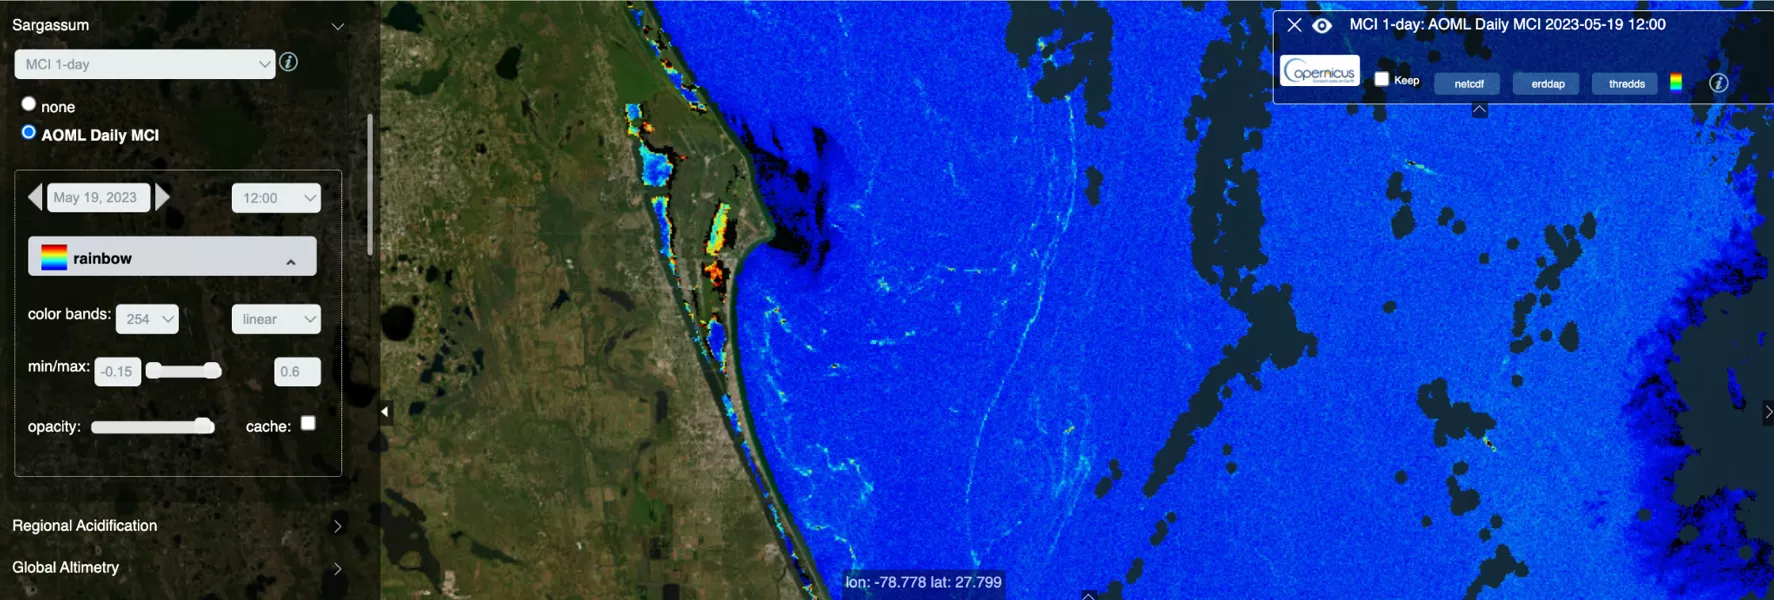 Screenshot of Ocean Viewer showing the presence of Sargassum along Central Florida on May 19, 2023. On the left side, there is a control panel with various adjustable settings, such as date and time (May 19, 2023, at 12:00), color representation (rainbow), and color bands. The visualization itself shows a coastal region with land on the left and sea on the right. The colors represent the Maximum Chlorophyll Index (MCI) that identifies those areas with high concentrations of chlorophyll. We can see the chara